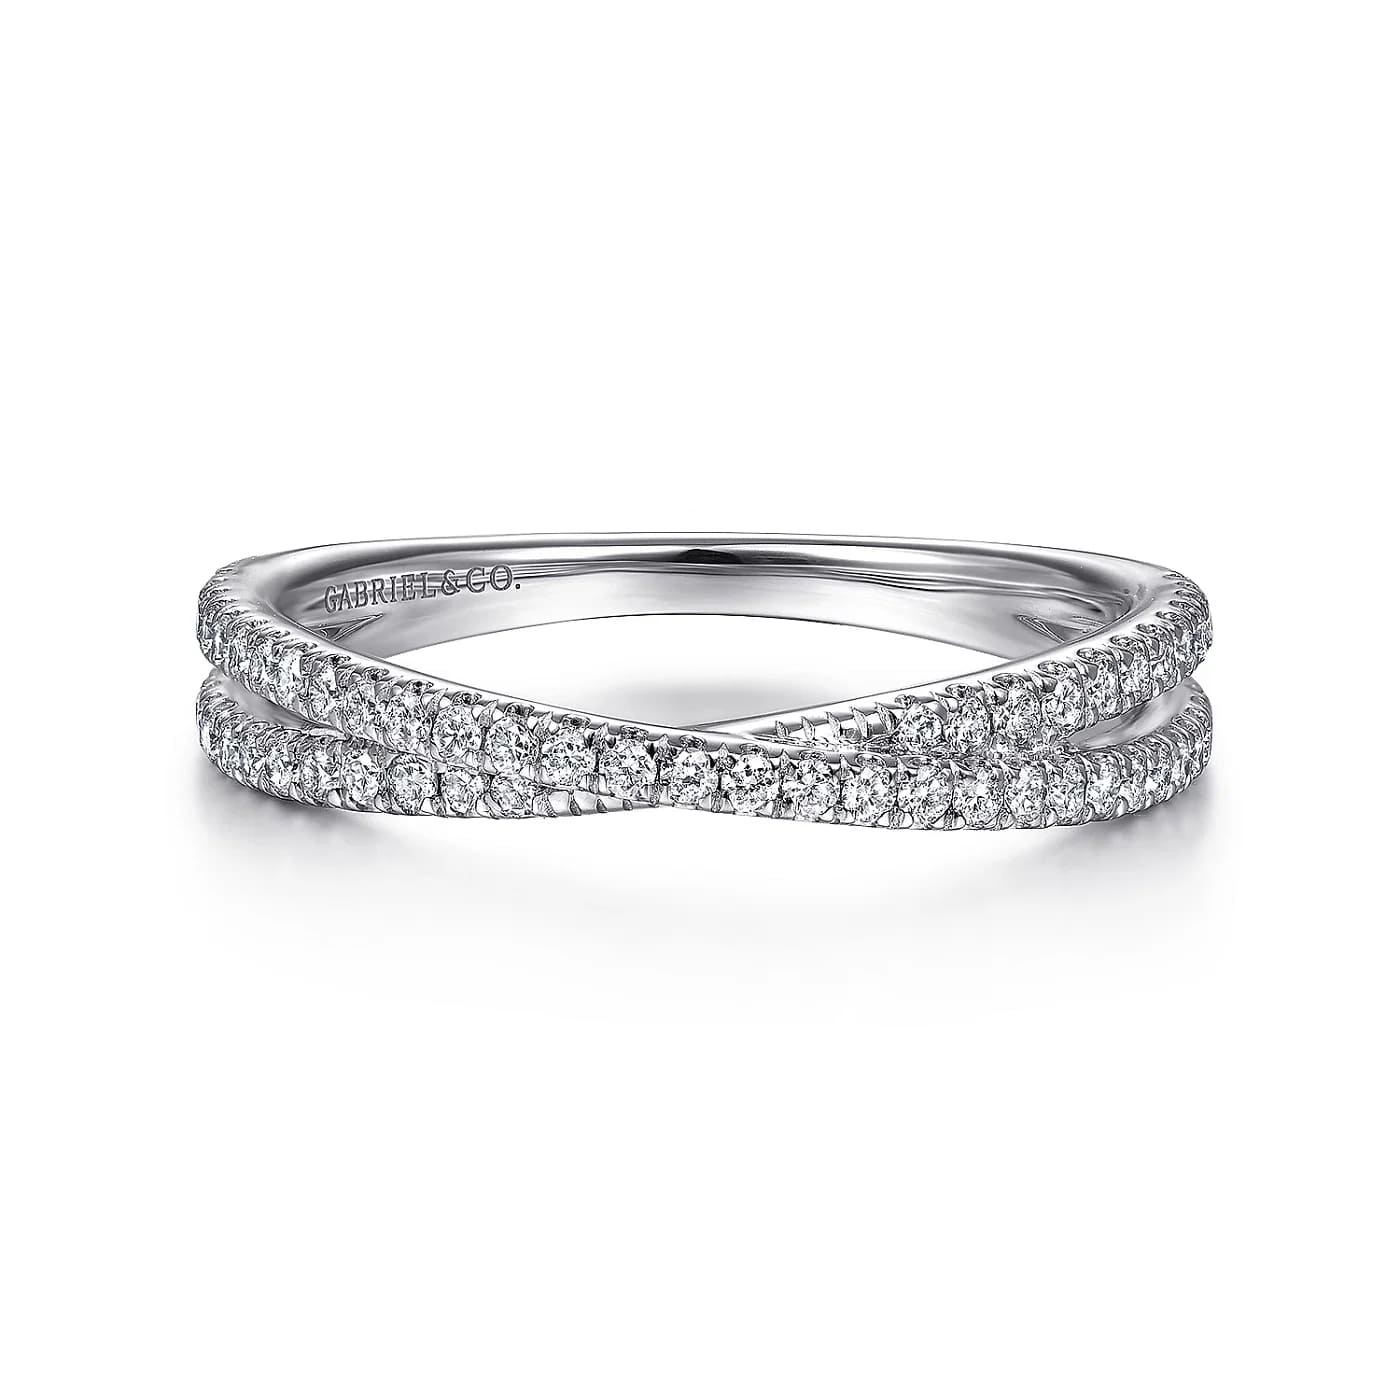 White Gold Diamond Criss Cross Ring, 0.30 cttw - JusticeJewelers